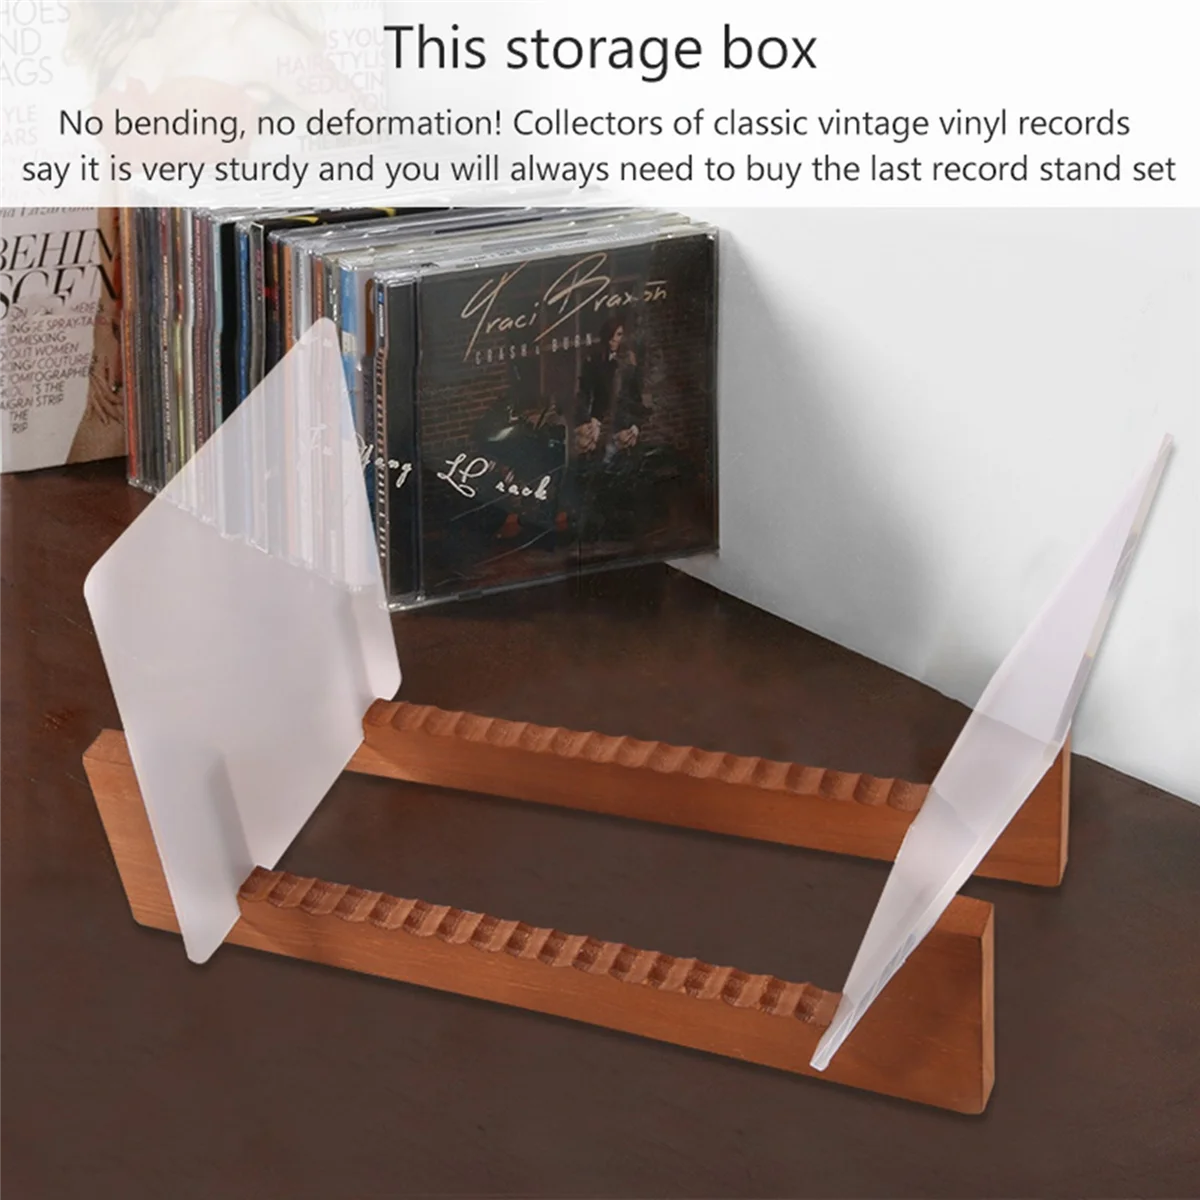 

Vinyl Record Storage Holder - Acrylic Ends - Display Your Singles and LPs in This Modern Portable Rack Unit